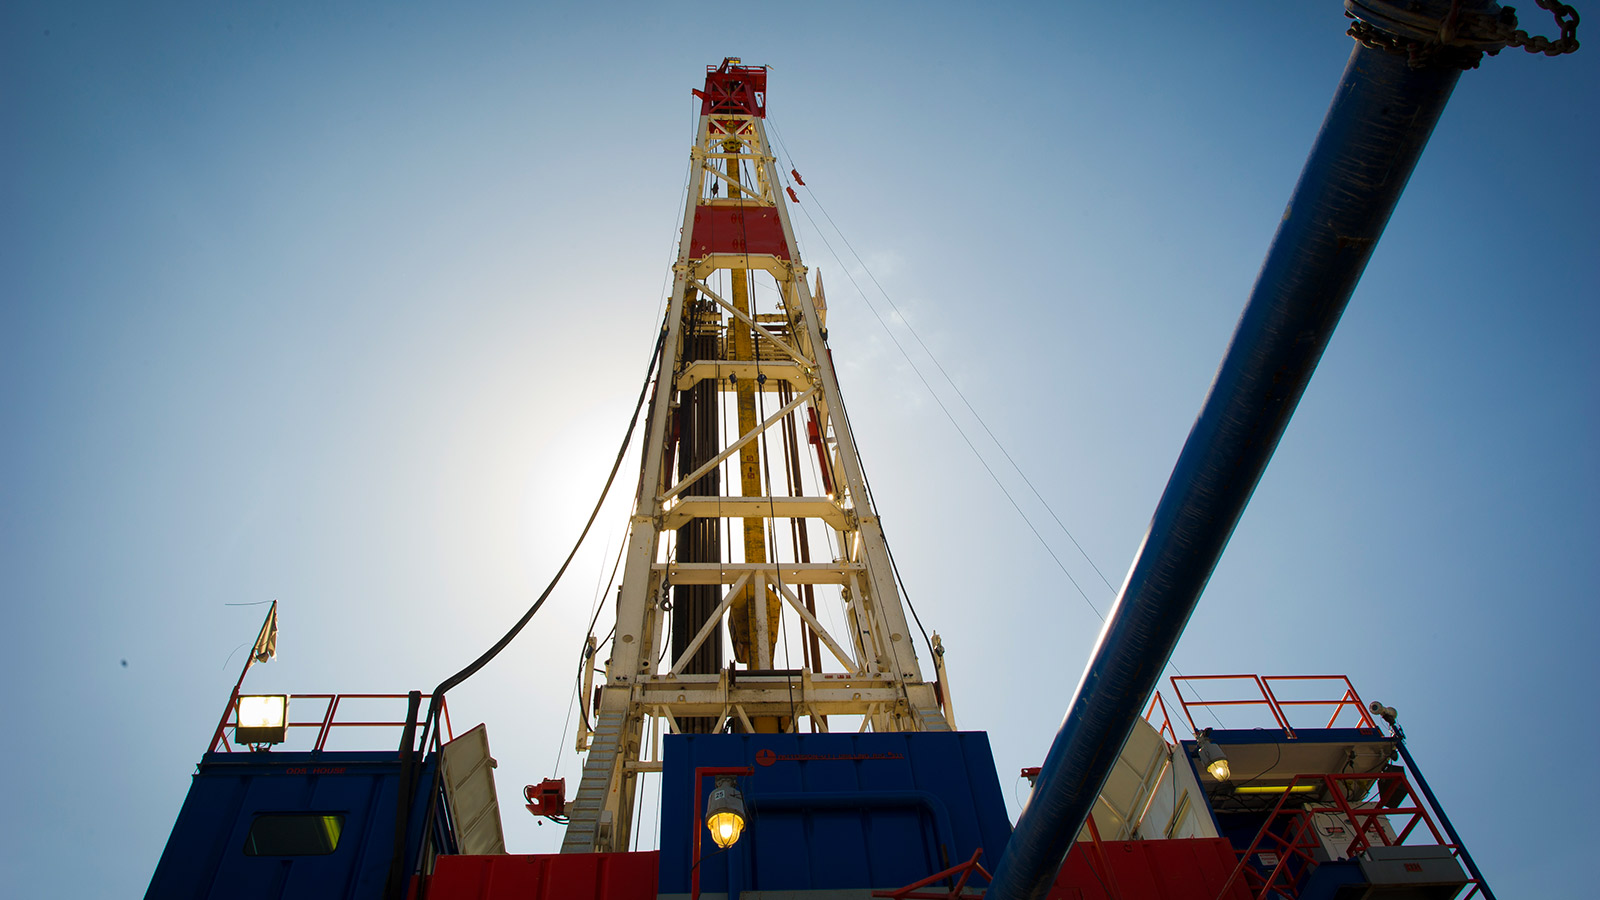 A Consol Energy Horizontal Gas Drilling Rig explores the Marcellus Shale outside the town of Waynesburg, PA on April 13, 2012.